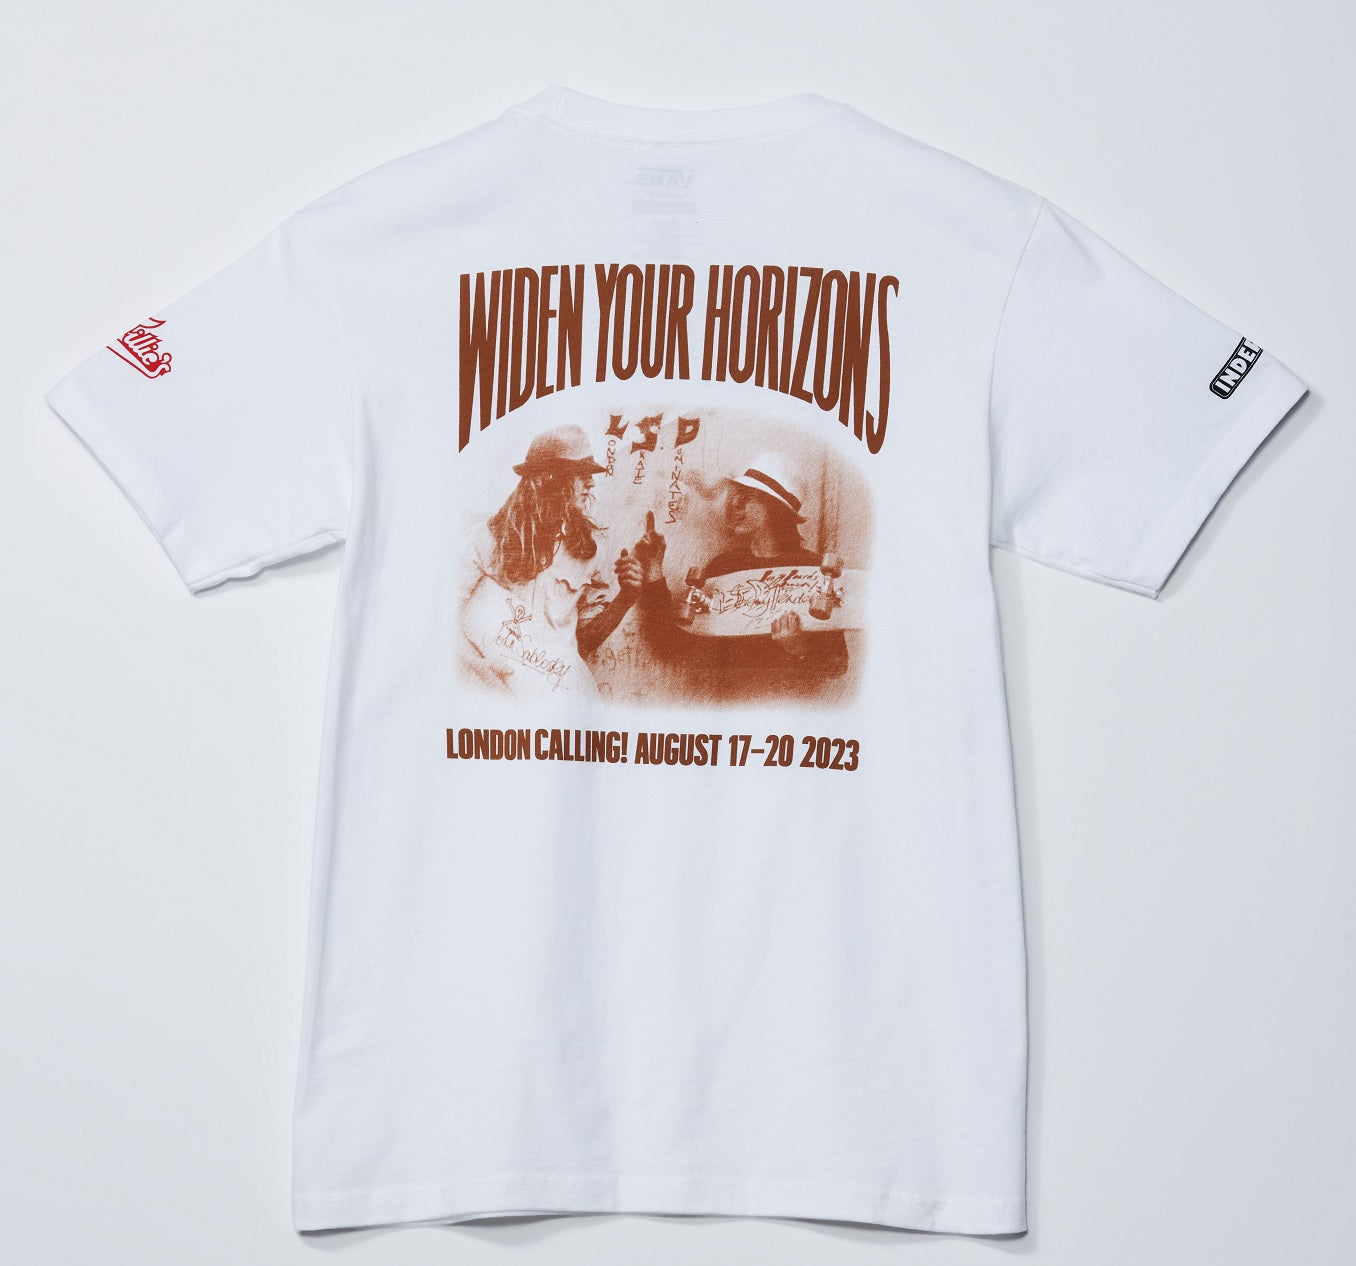 London Calling Limited Edition Event T-Shirt